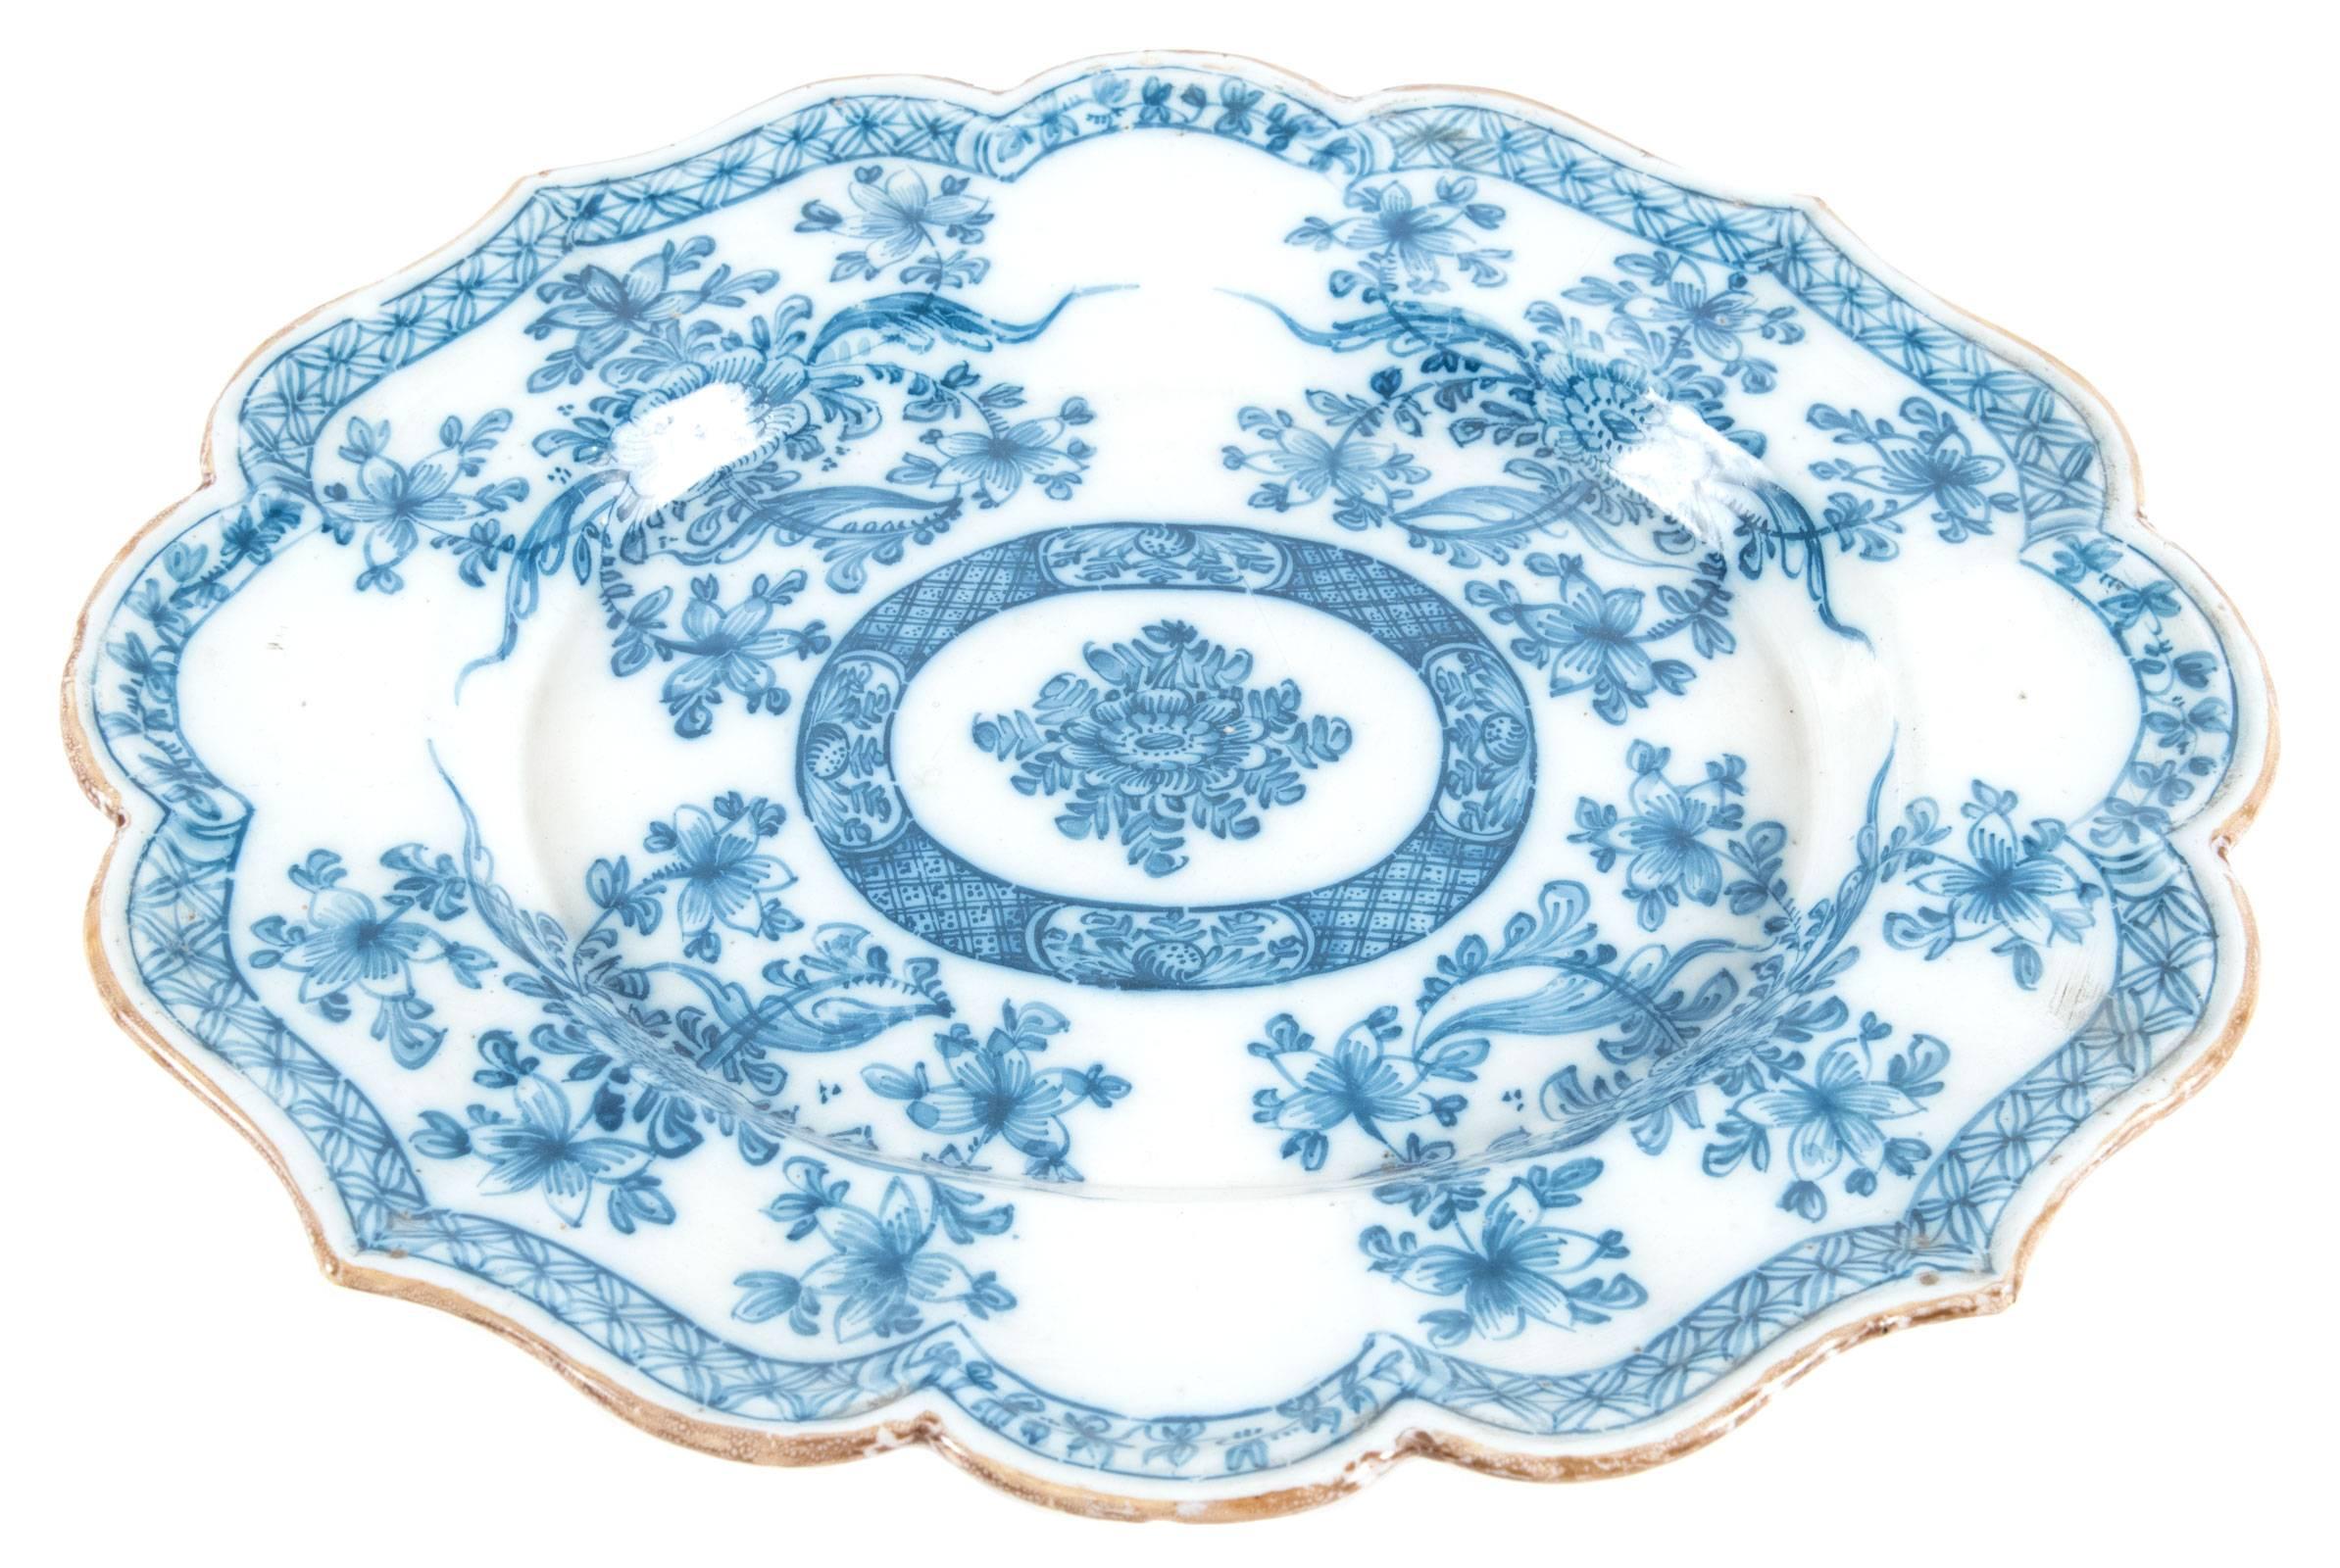 A beautiful blue and white Chinese porcelain lotus shaped plate trimmed with gilt enamel. The face is hand-painted with stylized border that follows the shape of the plate and encompasses four groupings of flowing floral and foliate designs, which